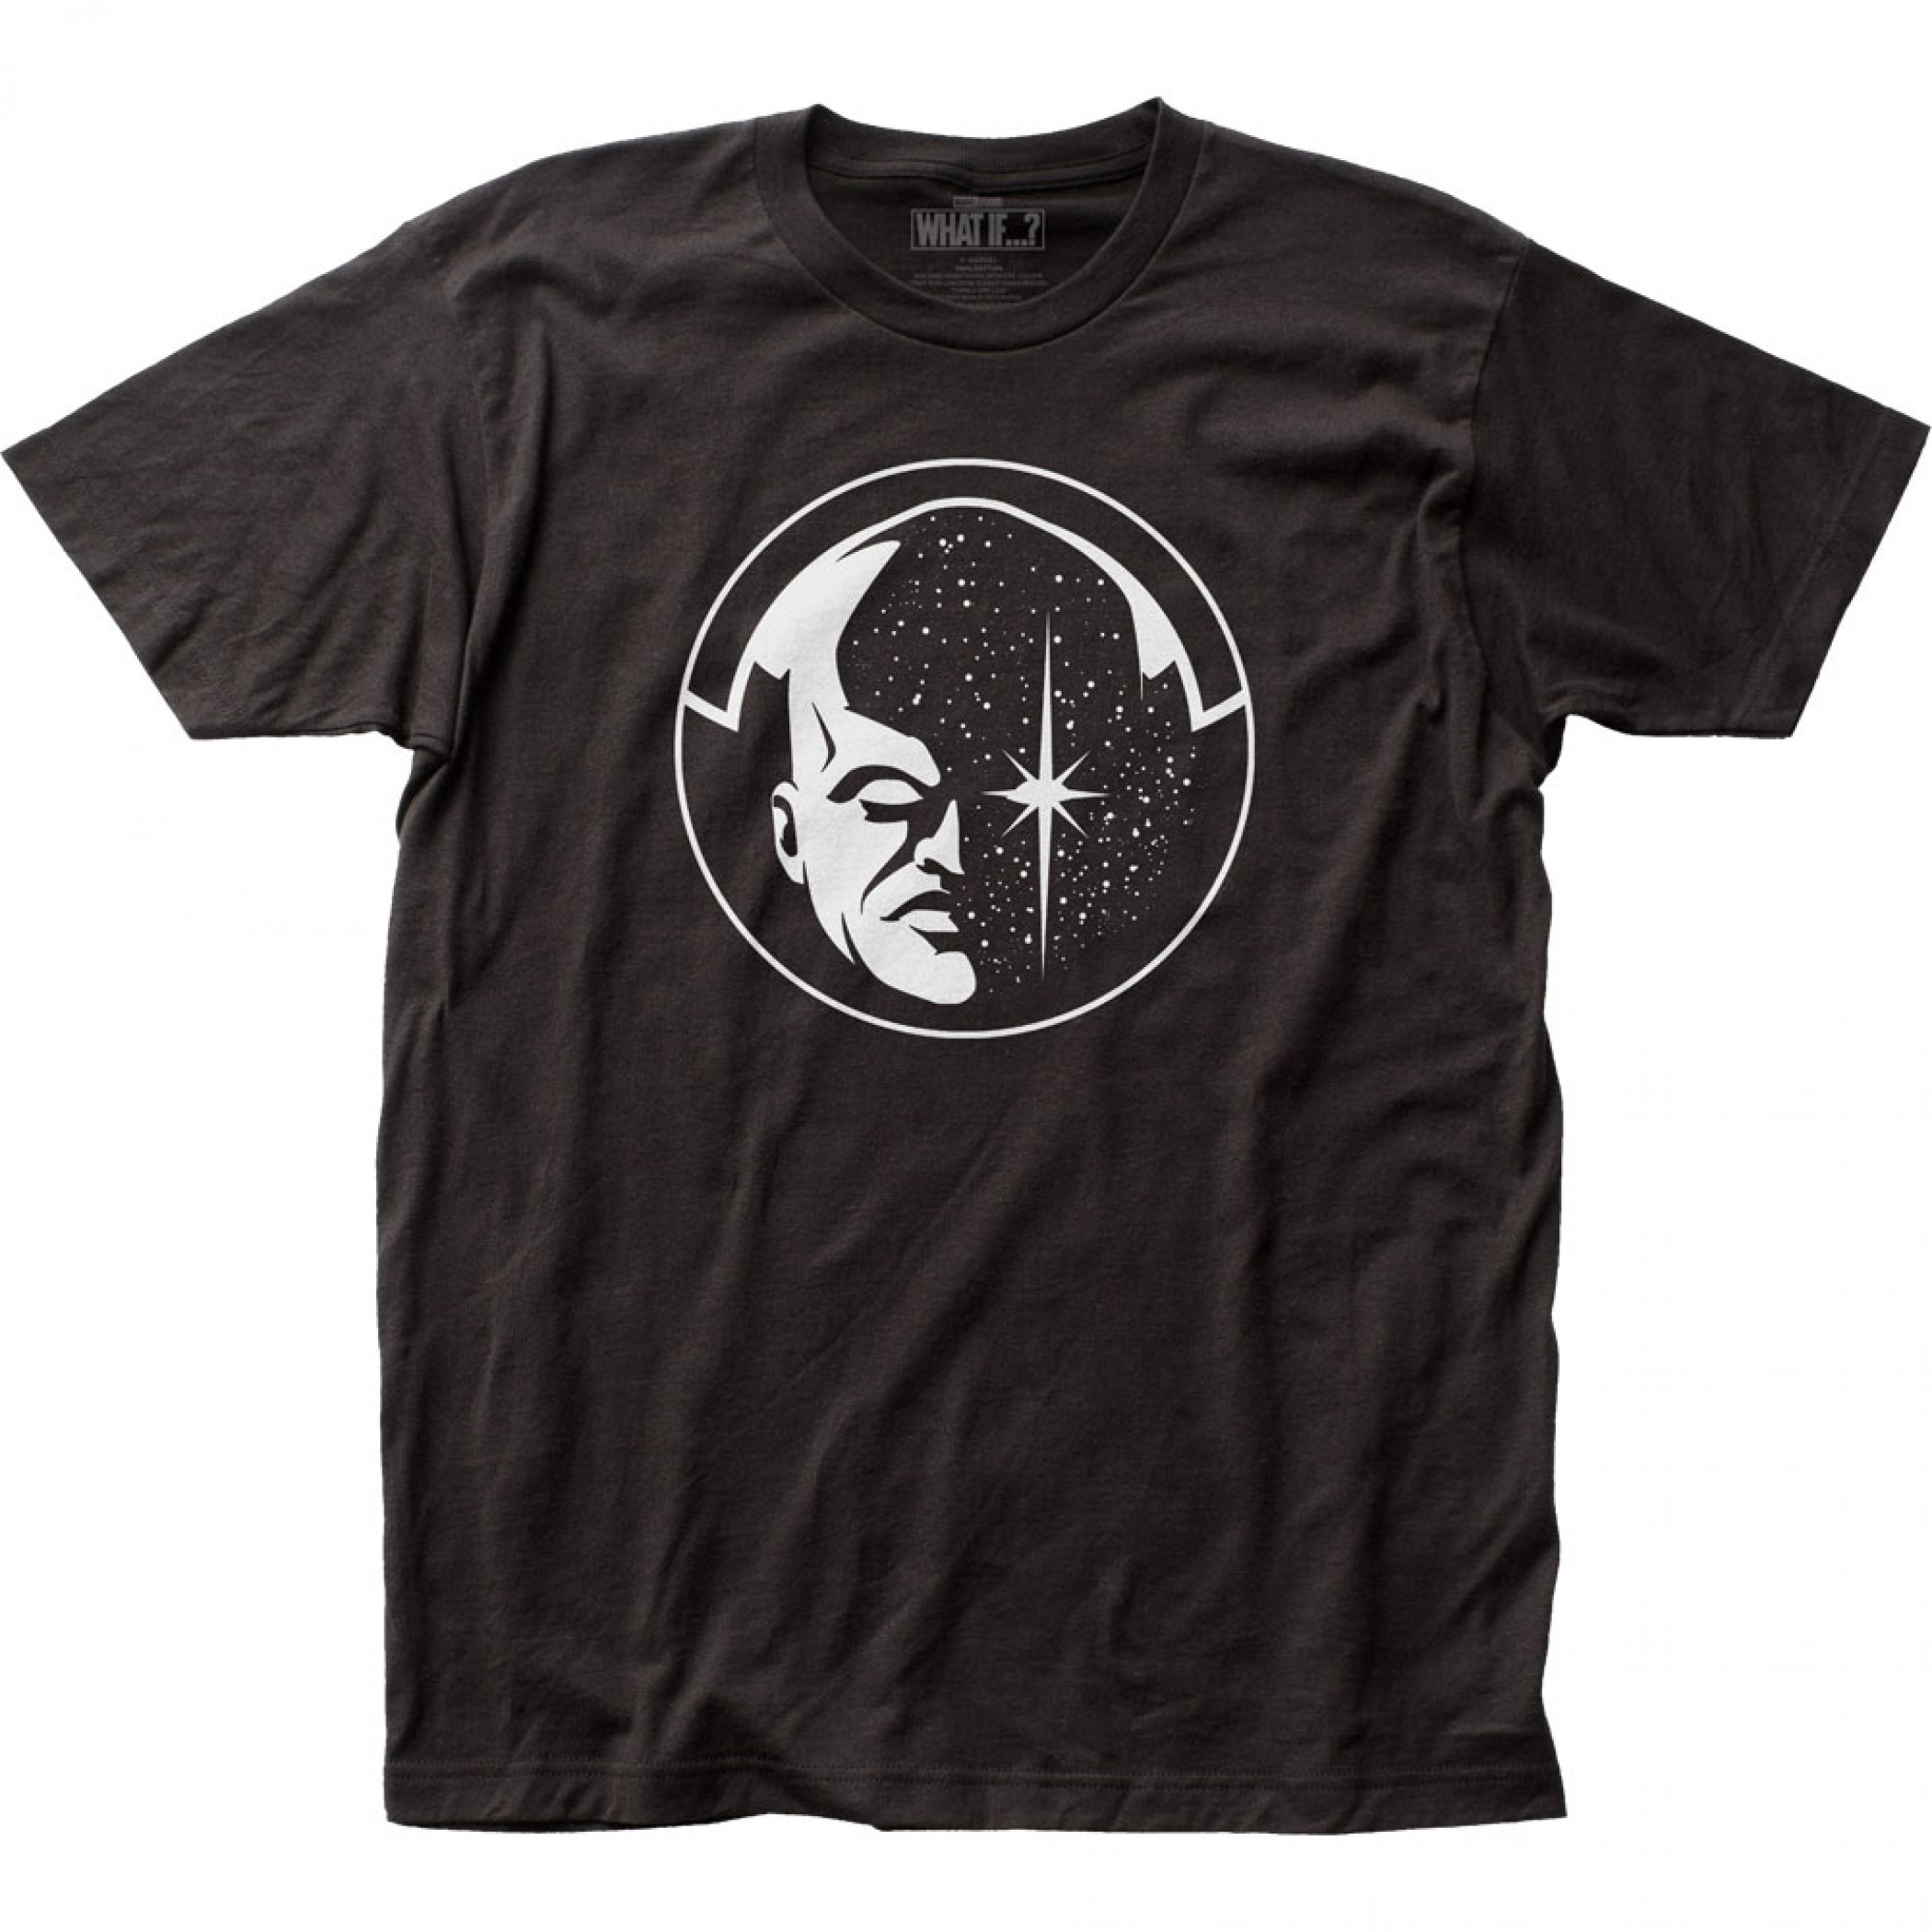 Marvel What If...? Series Watcher Icon T-Shirt